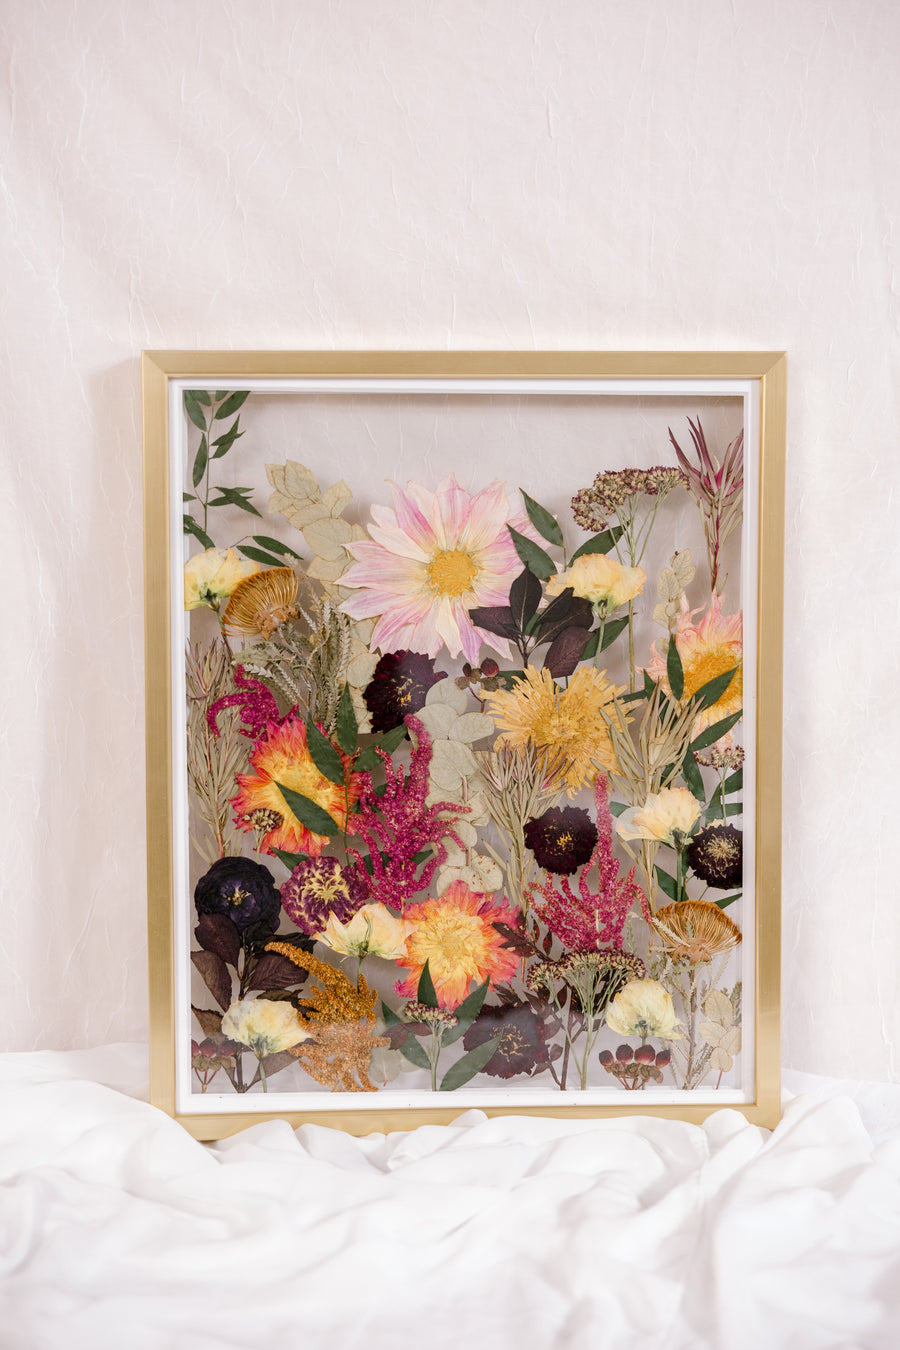 Pressed flowers are displayed as if they were growing from the ground in this gold wood floating frame.